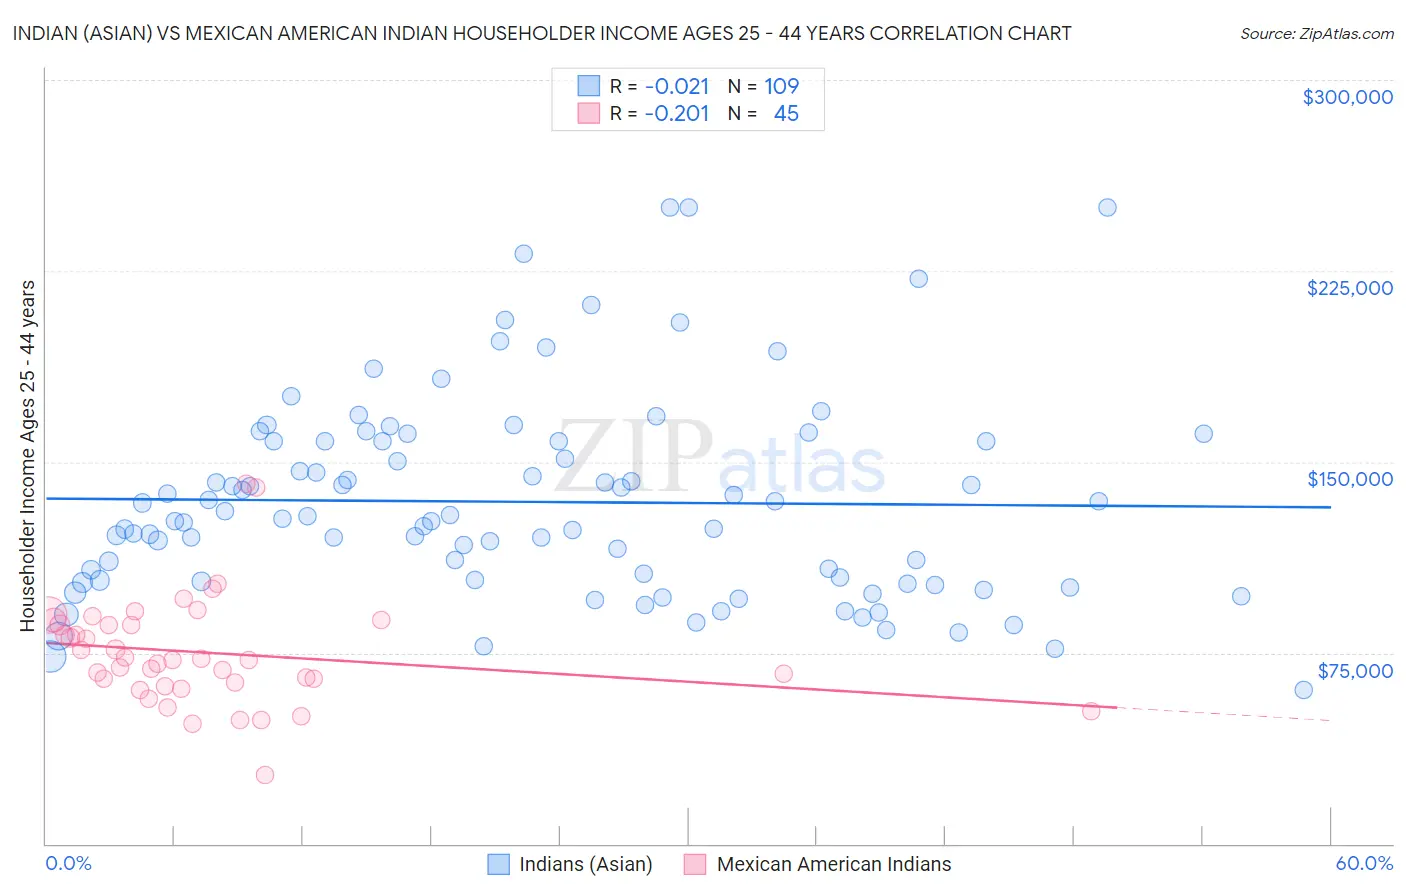 Indian (Asian) vs Mexican American Indian Householder Income Ages 25 - 44 years